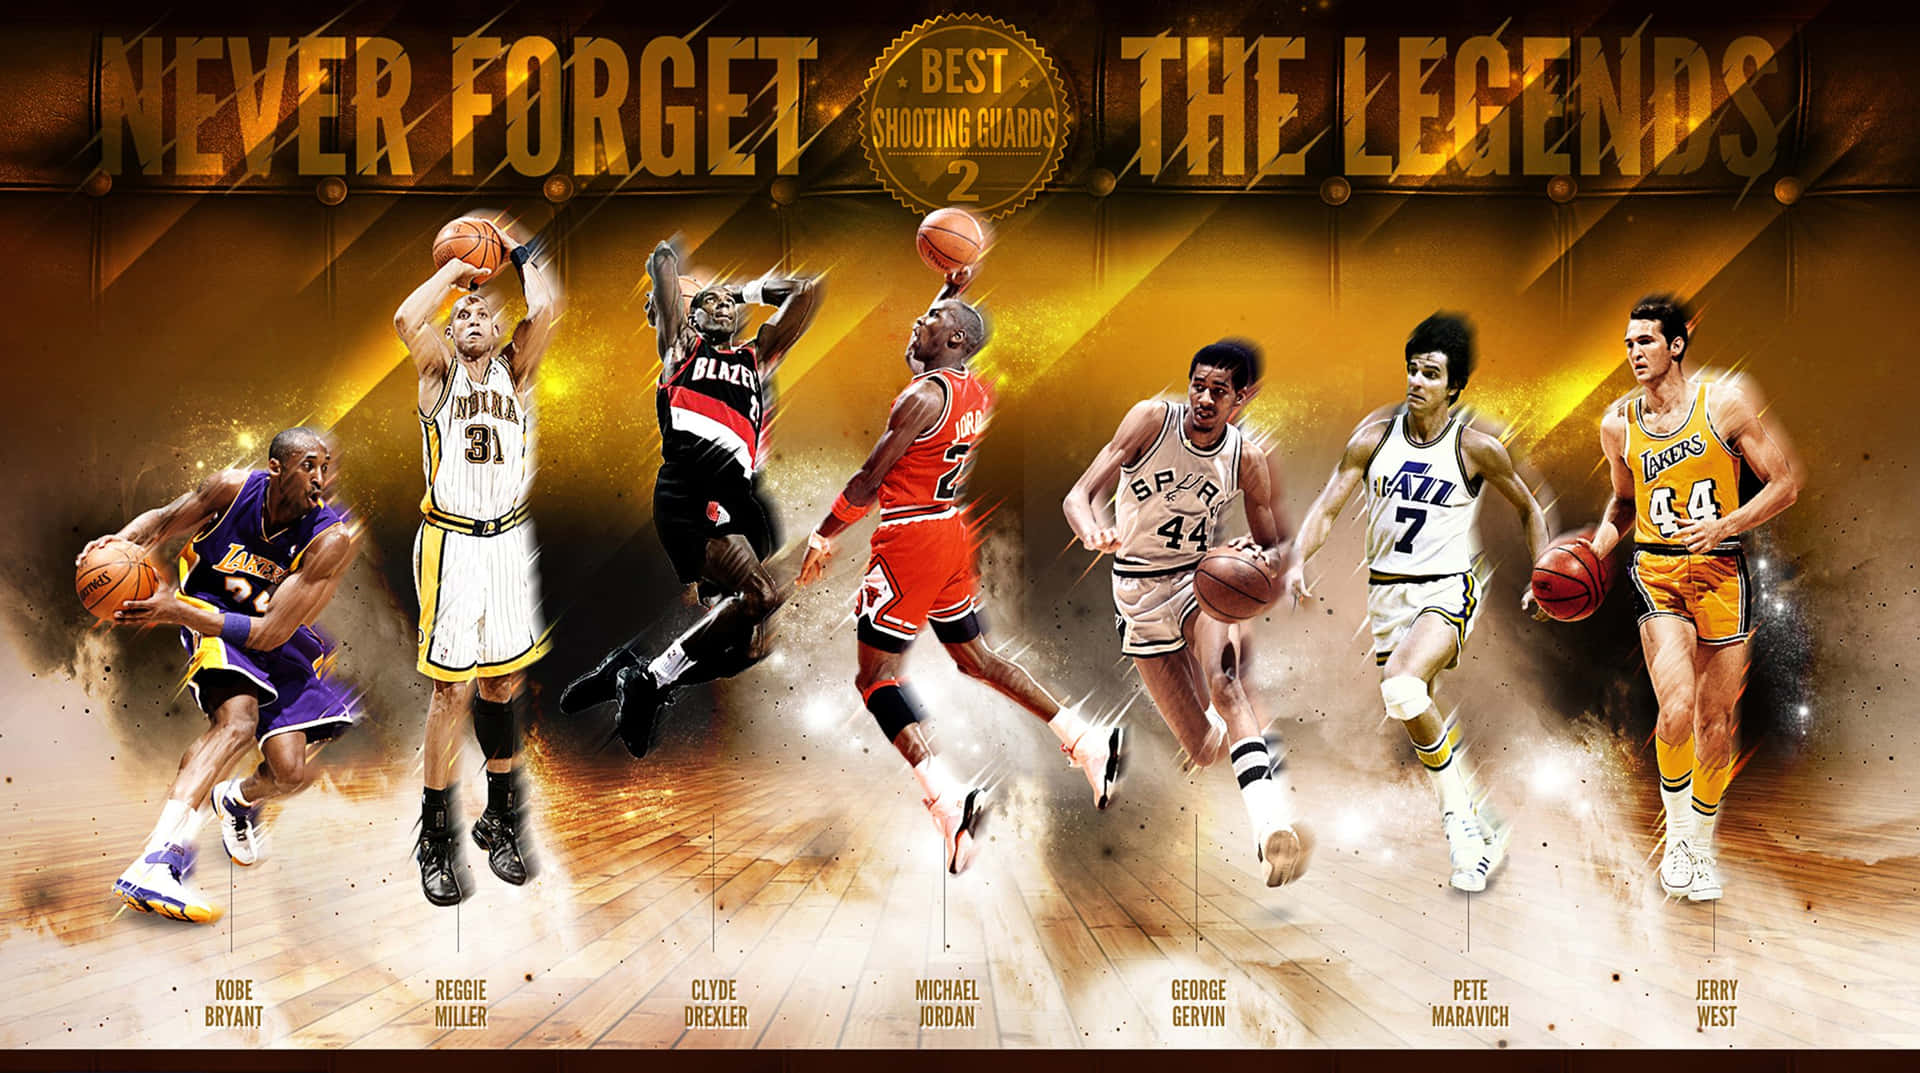 Nba Players In A Poster With The Words Never Forget The Legends Wallpaper